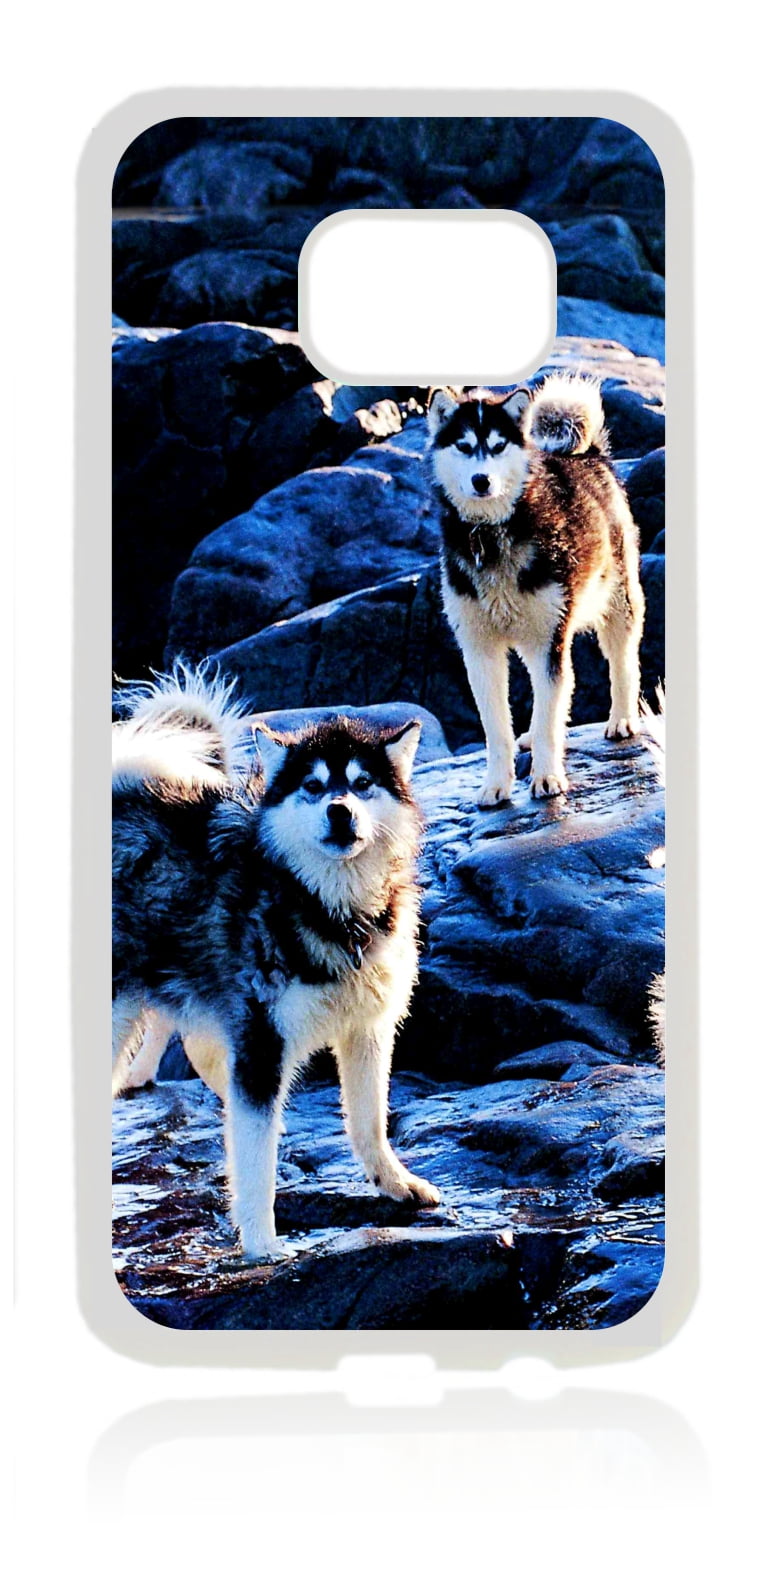 Husky Dogs on Snow Tipped Mountains Animal White Rubber Thin Case Cover for the Samsung Galaxy s7 - Samsung Galaxys7 Accessories - s7 Phone Case